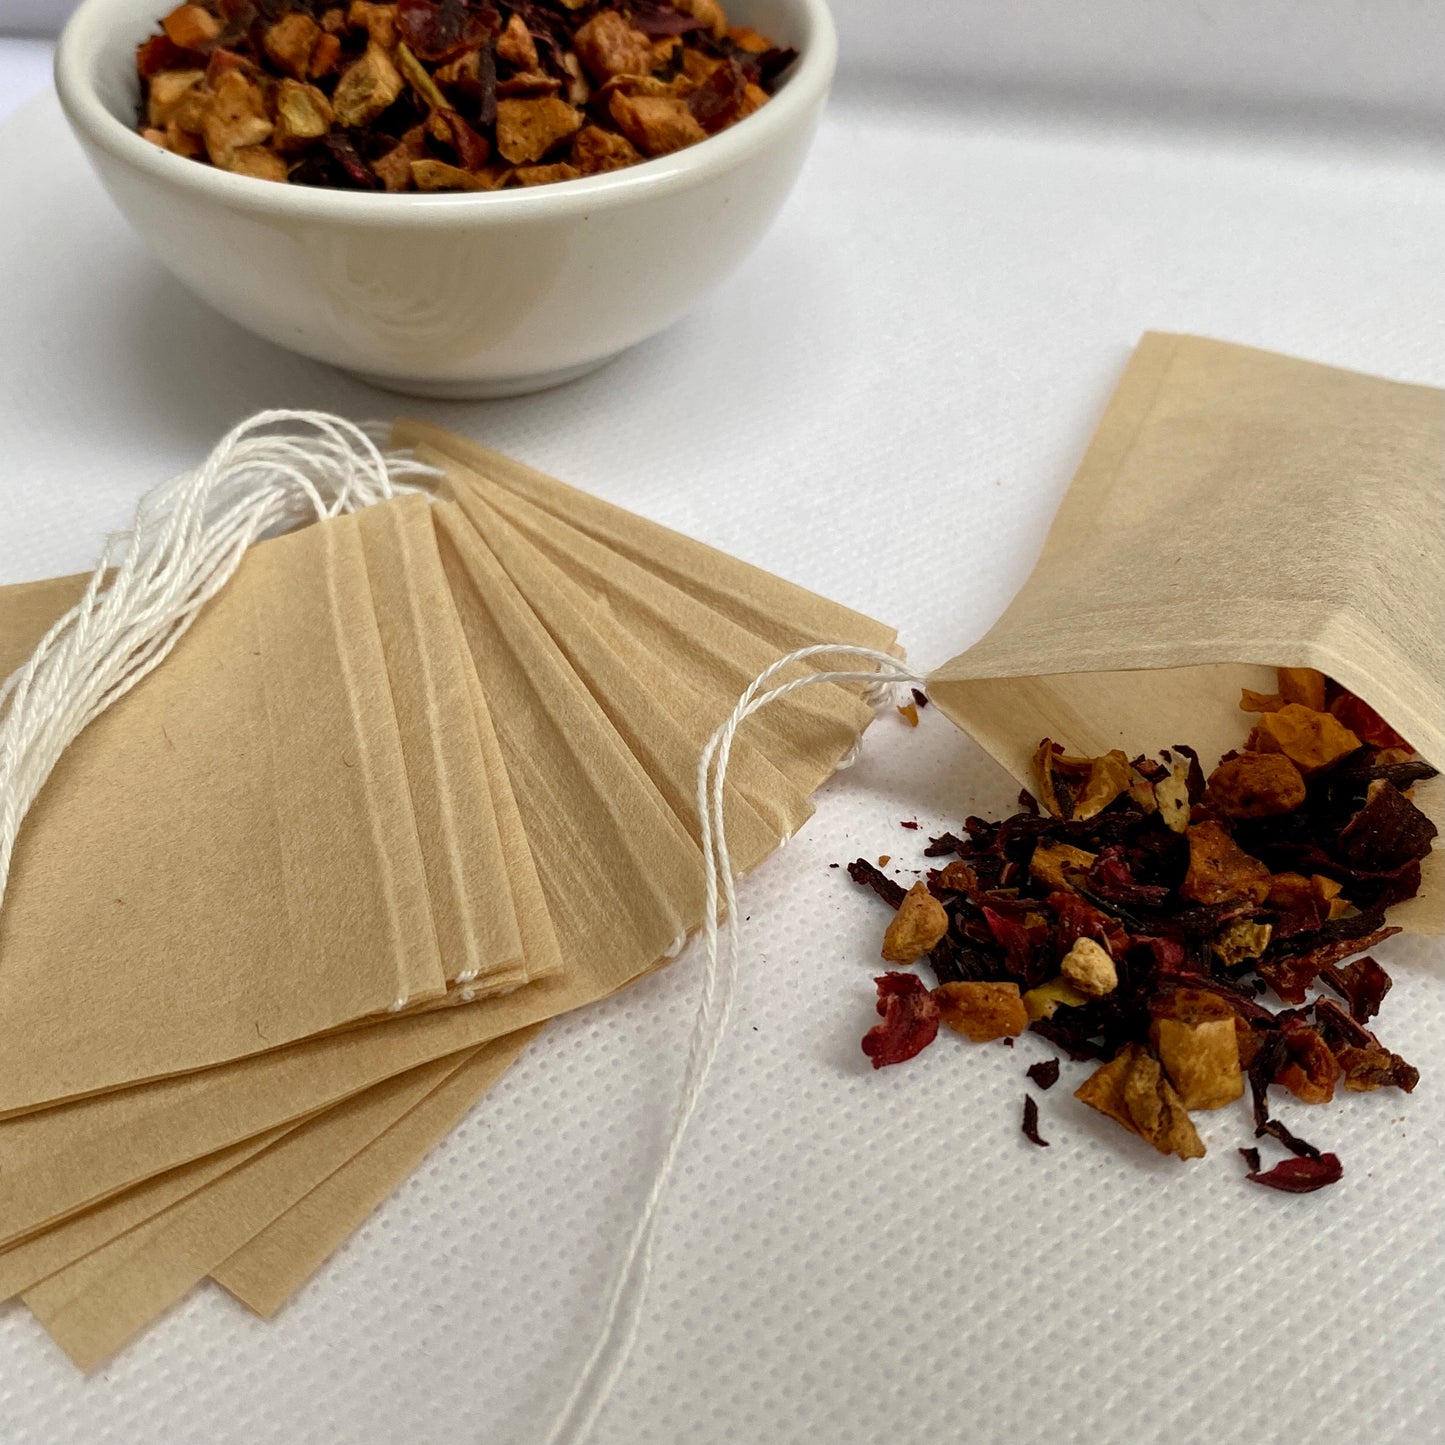 Fill-Your-Own Teabags